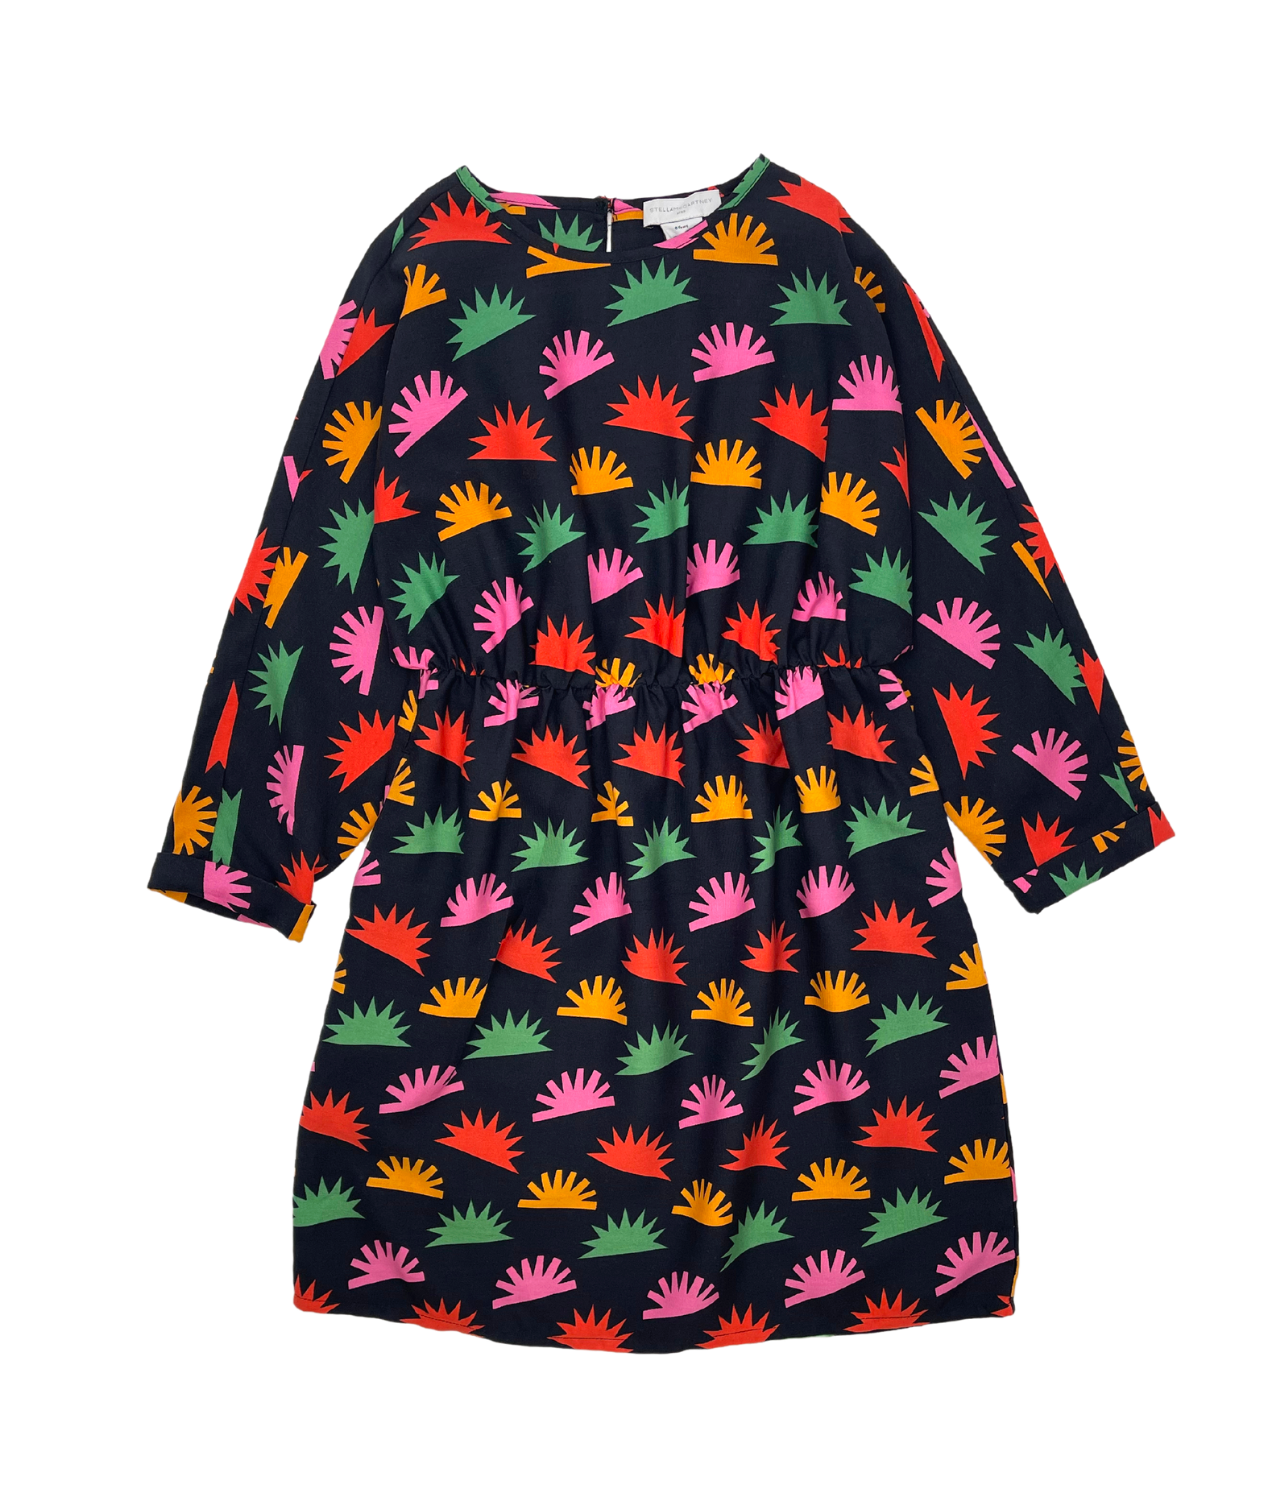 STELLA MCCARTNEY - Black dress with multicolor patterns - 8 years old